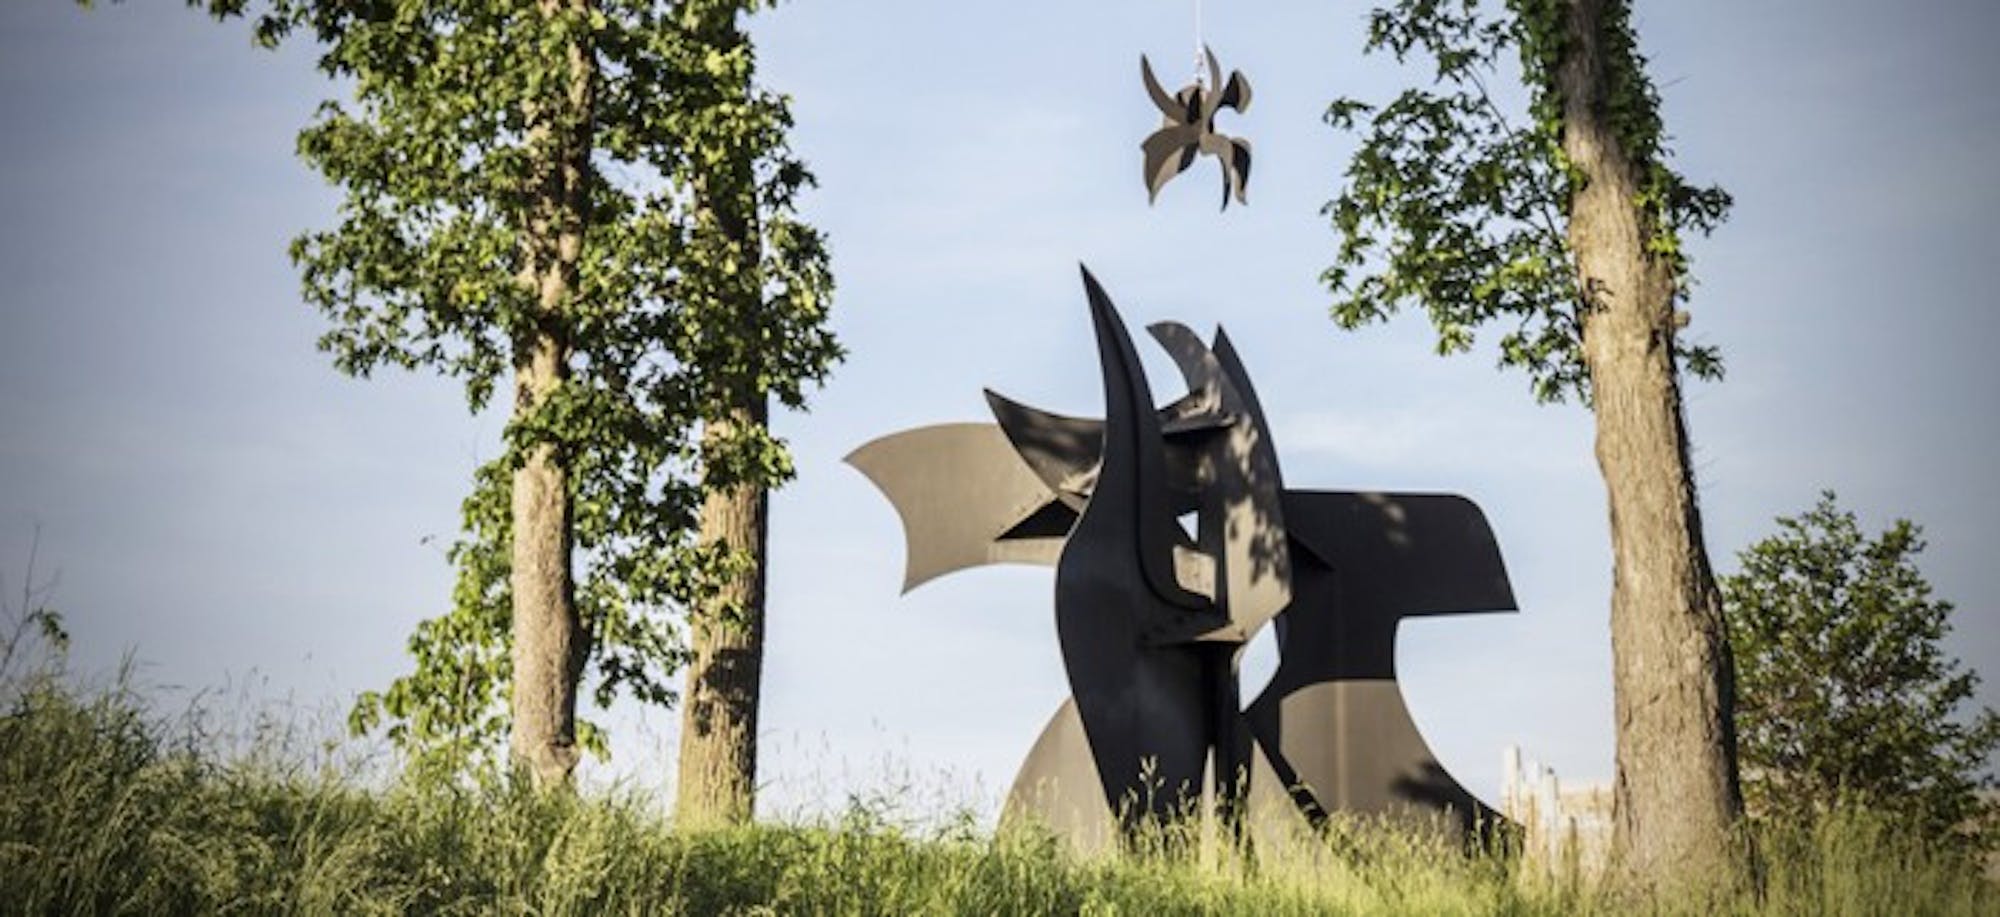 A new sculpture is featured in the Charles B. Hayes Family Sculpture Park, which reopens Friday and is located on the south side of Notre Dame’s campus. The park features work from artists around the globe.